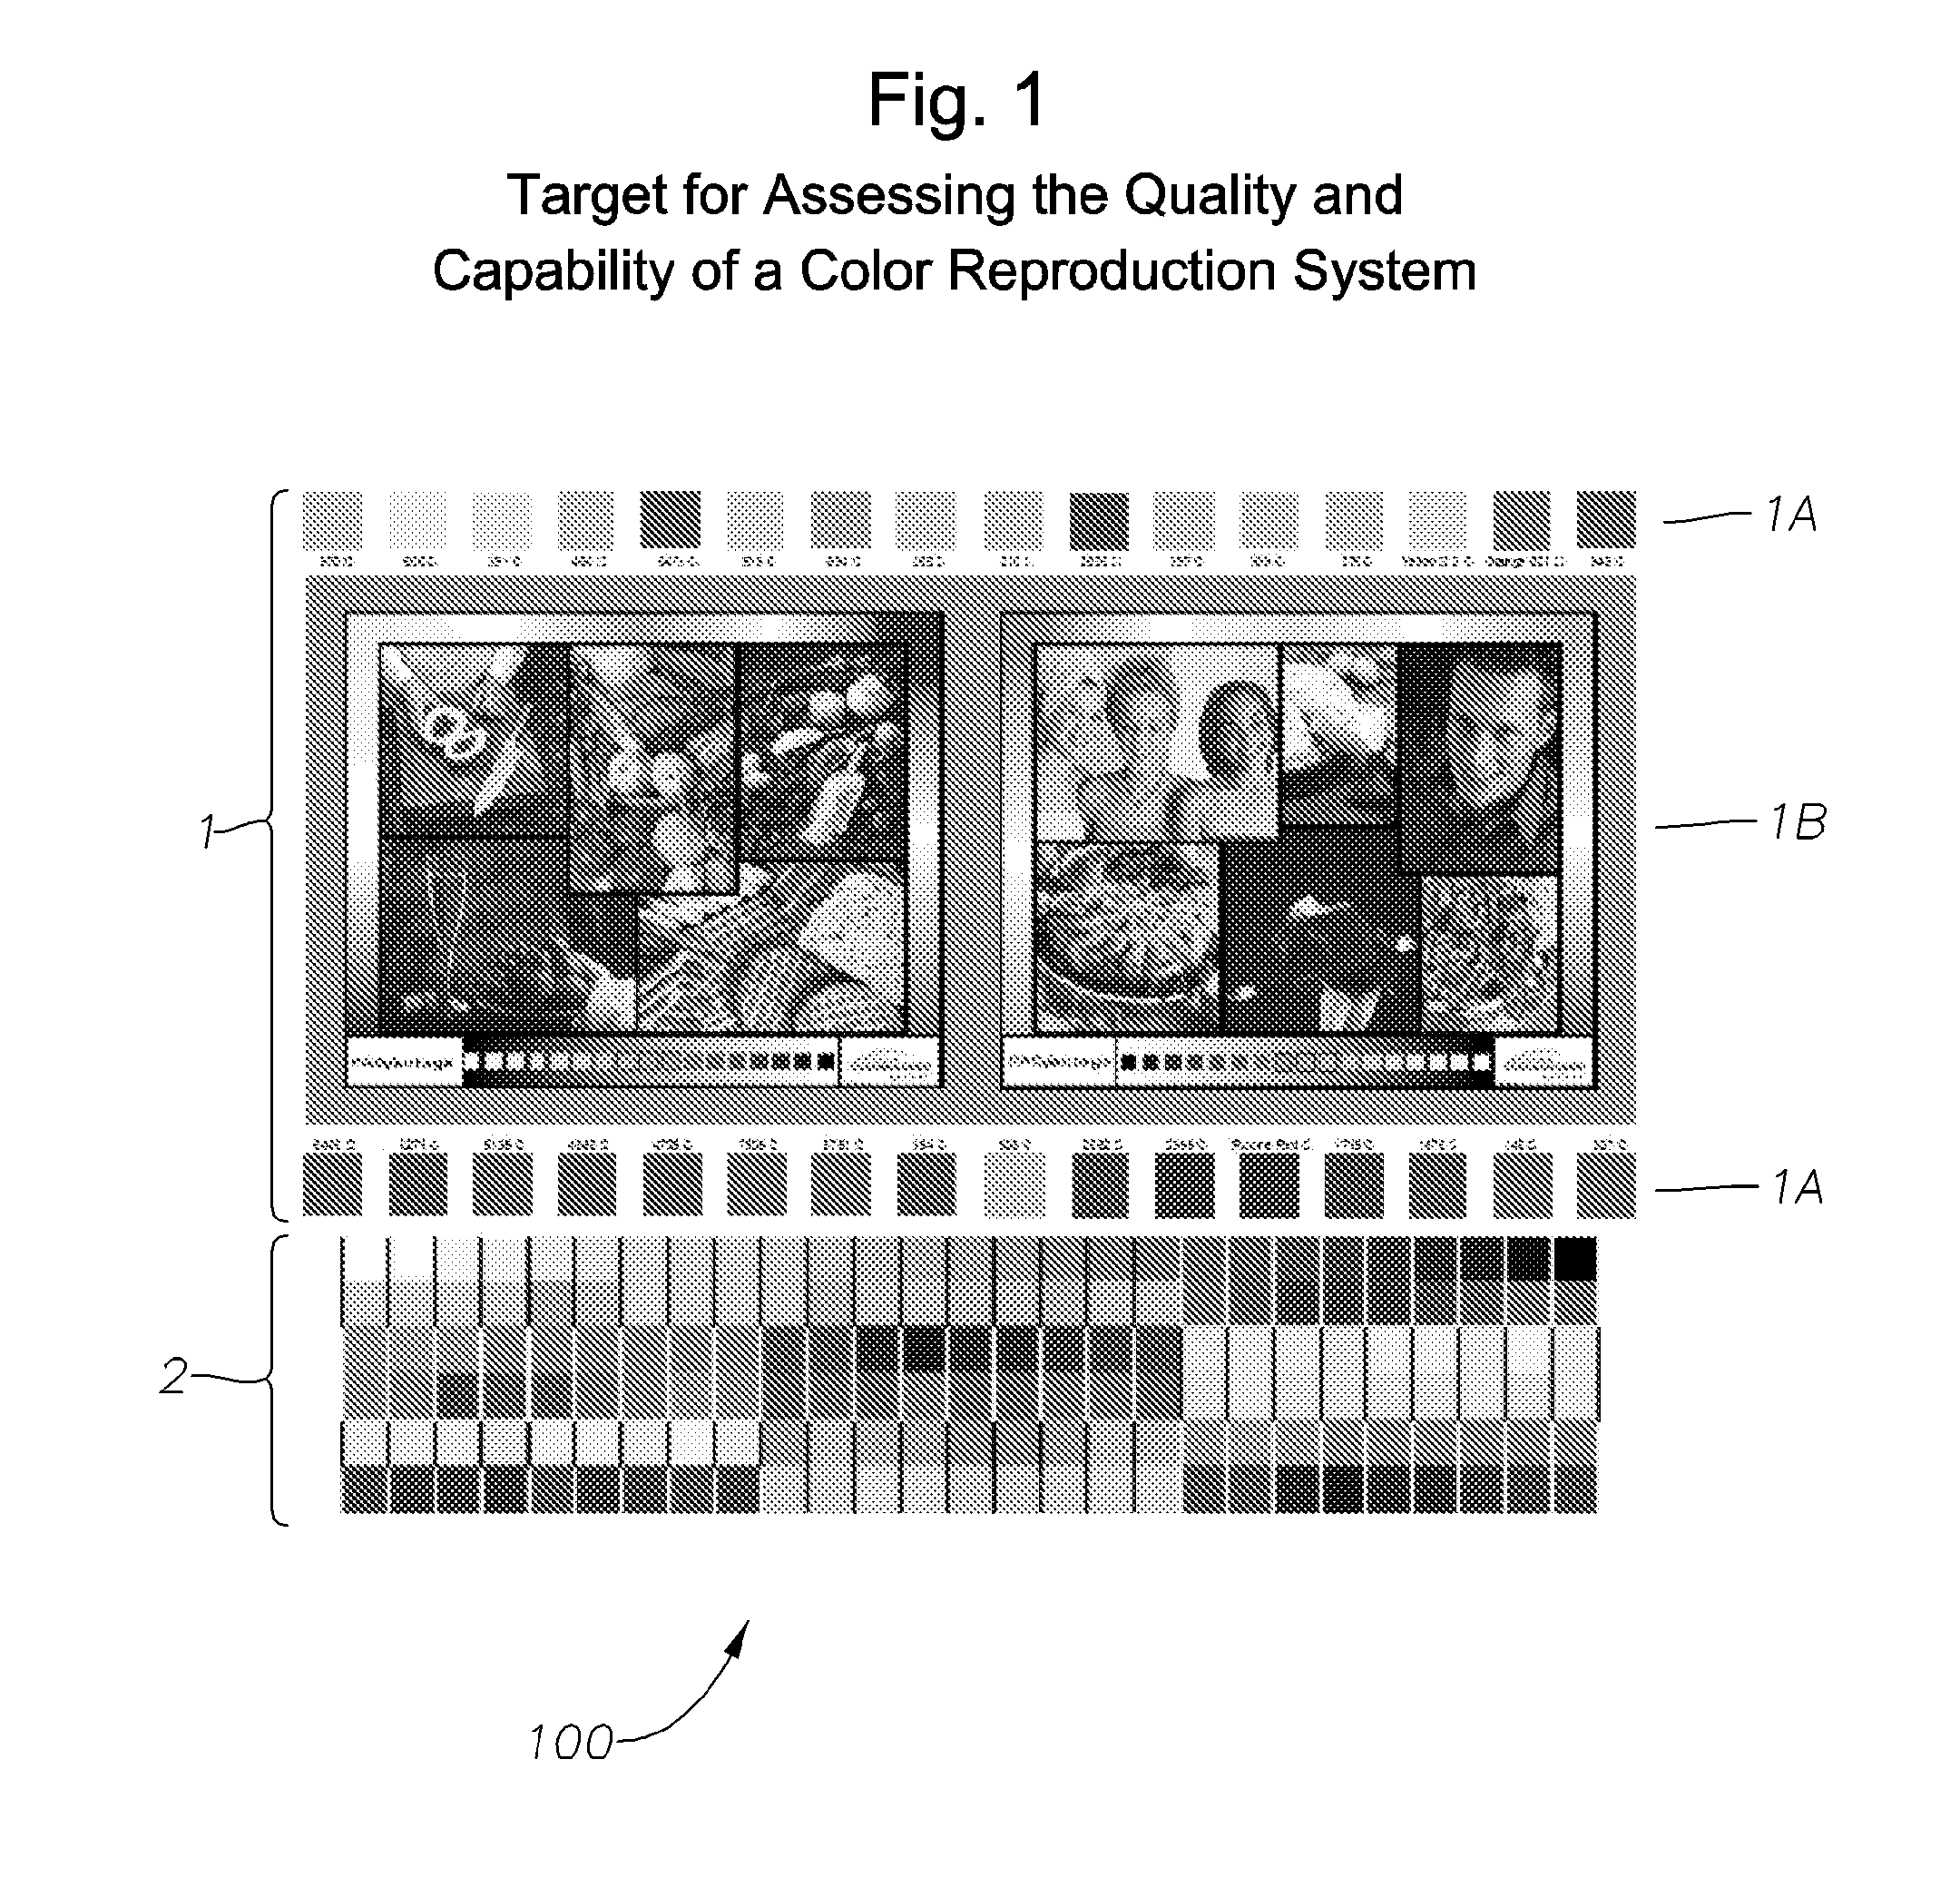 Methods And Apparatus For Assessing And Monitoring The Capability And Quality Of A color Reproduction System